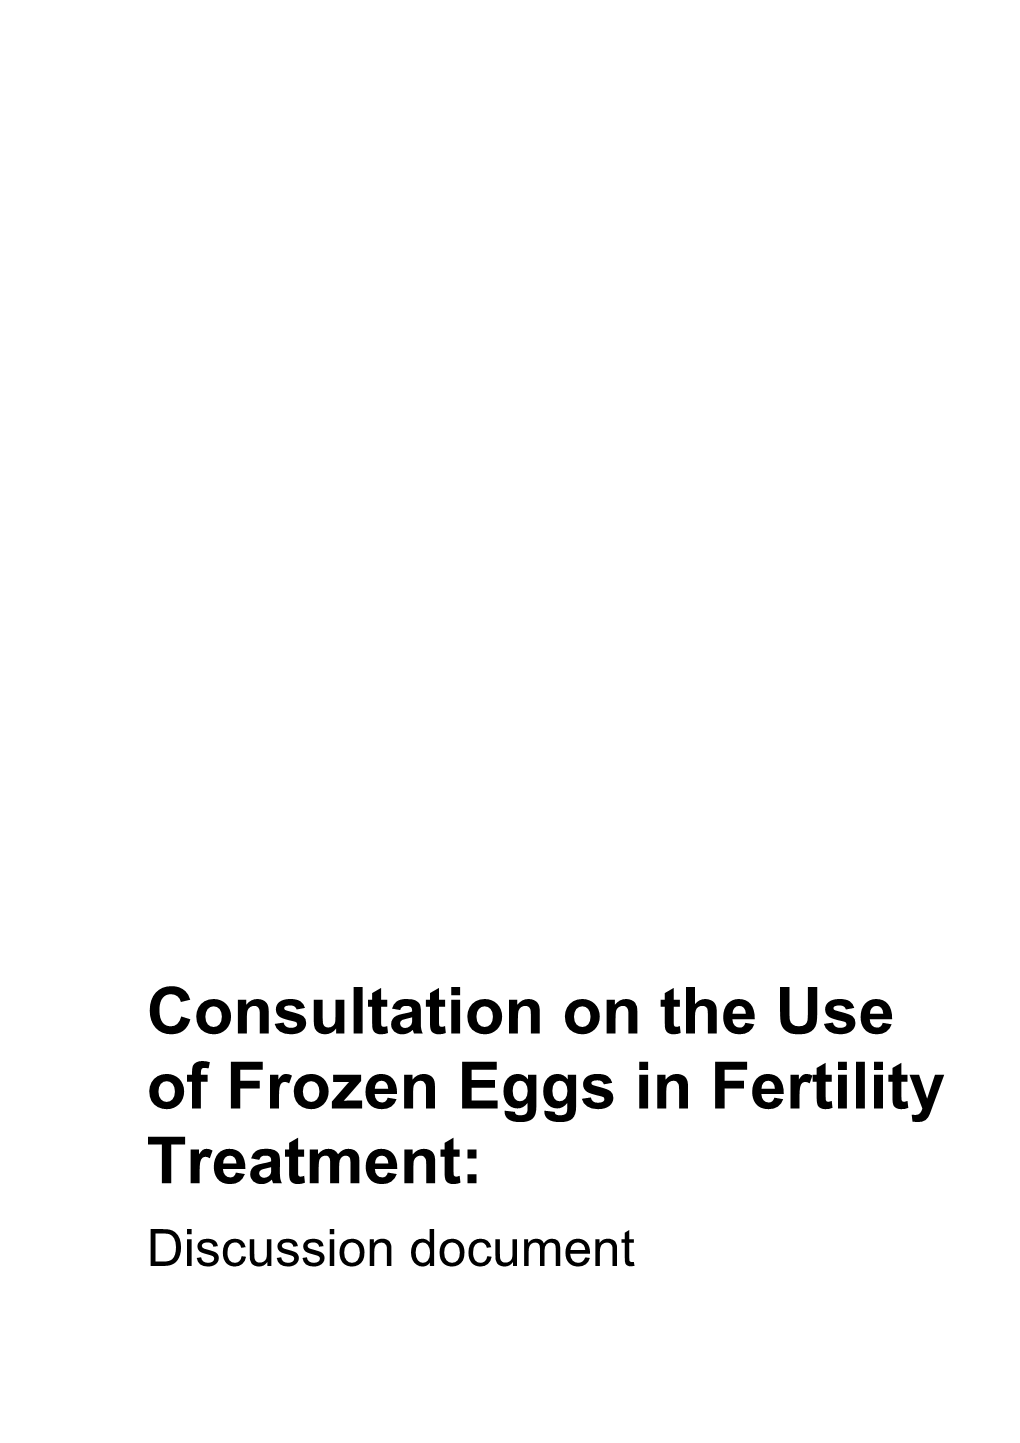 Consultation on the Use of Frozen Eggs in Fertility Treatment